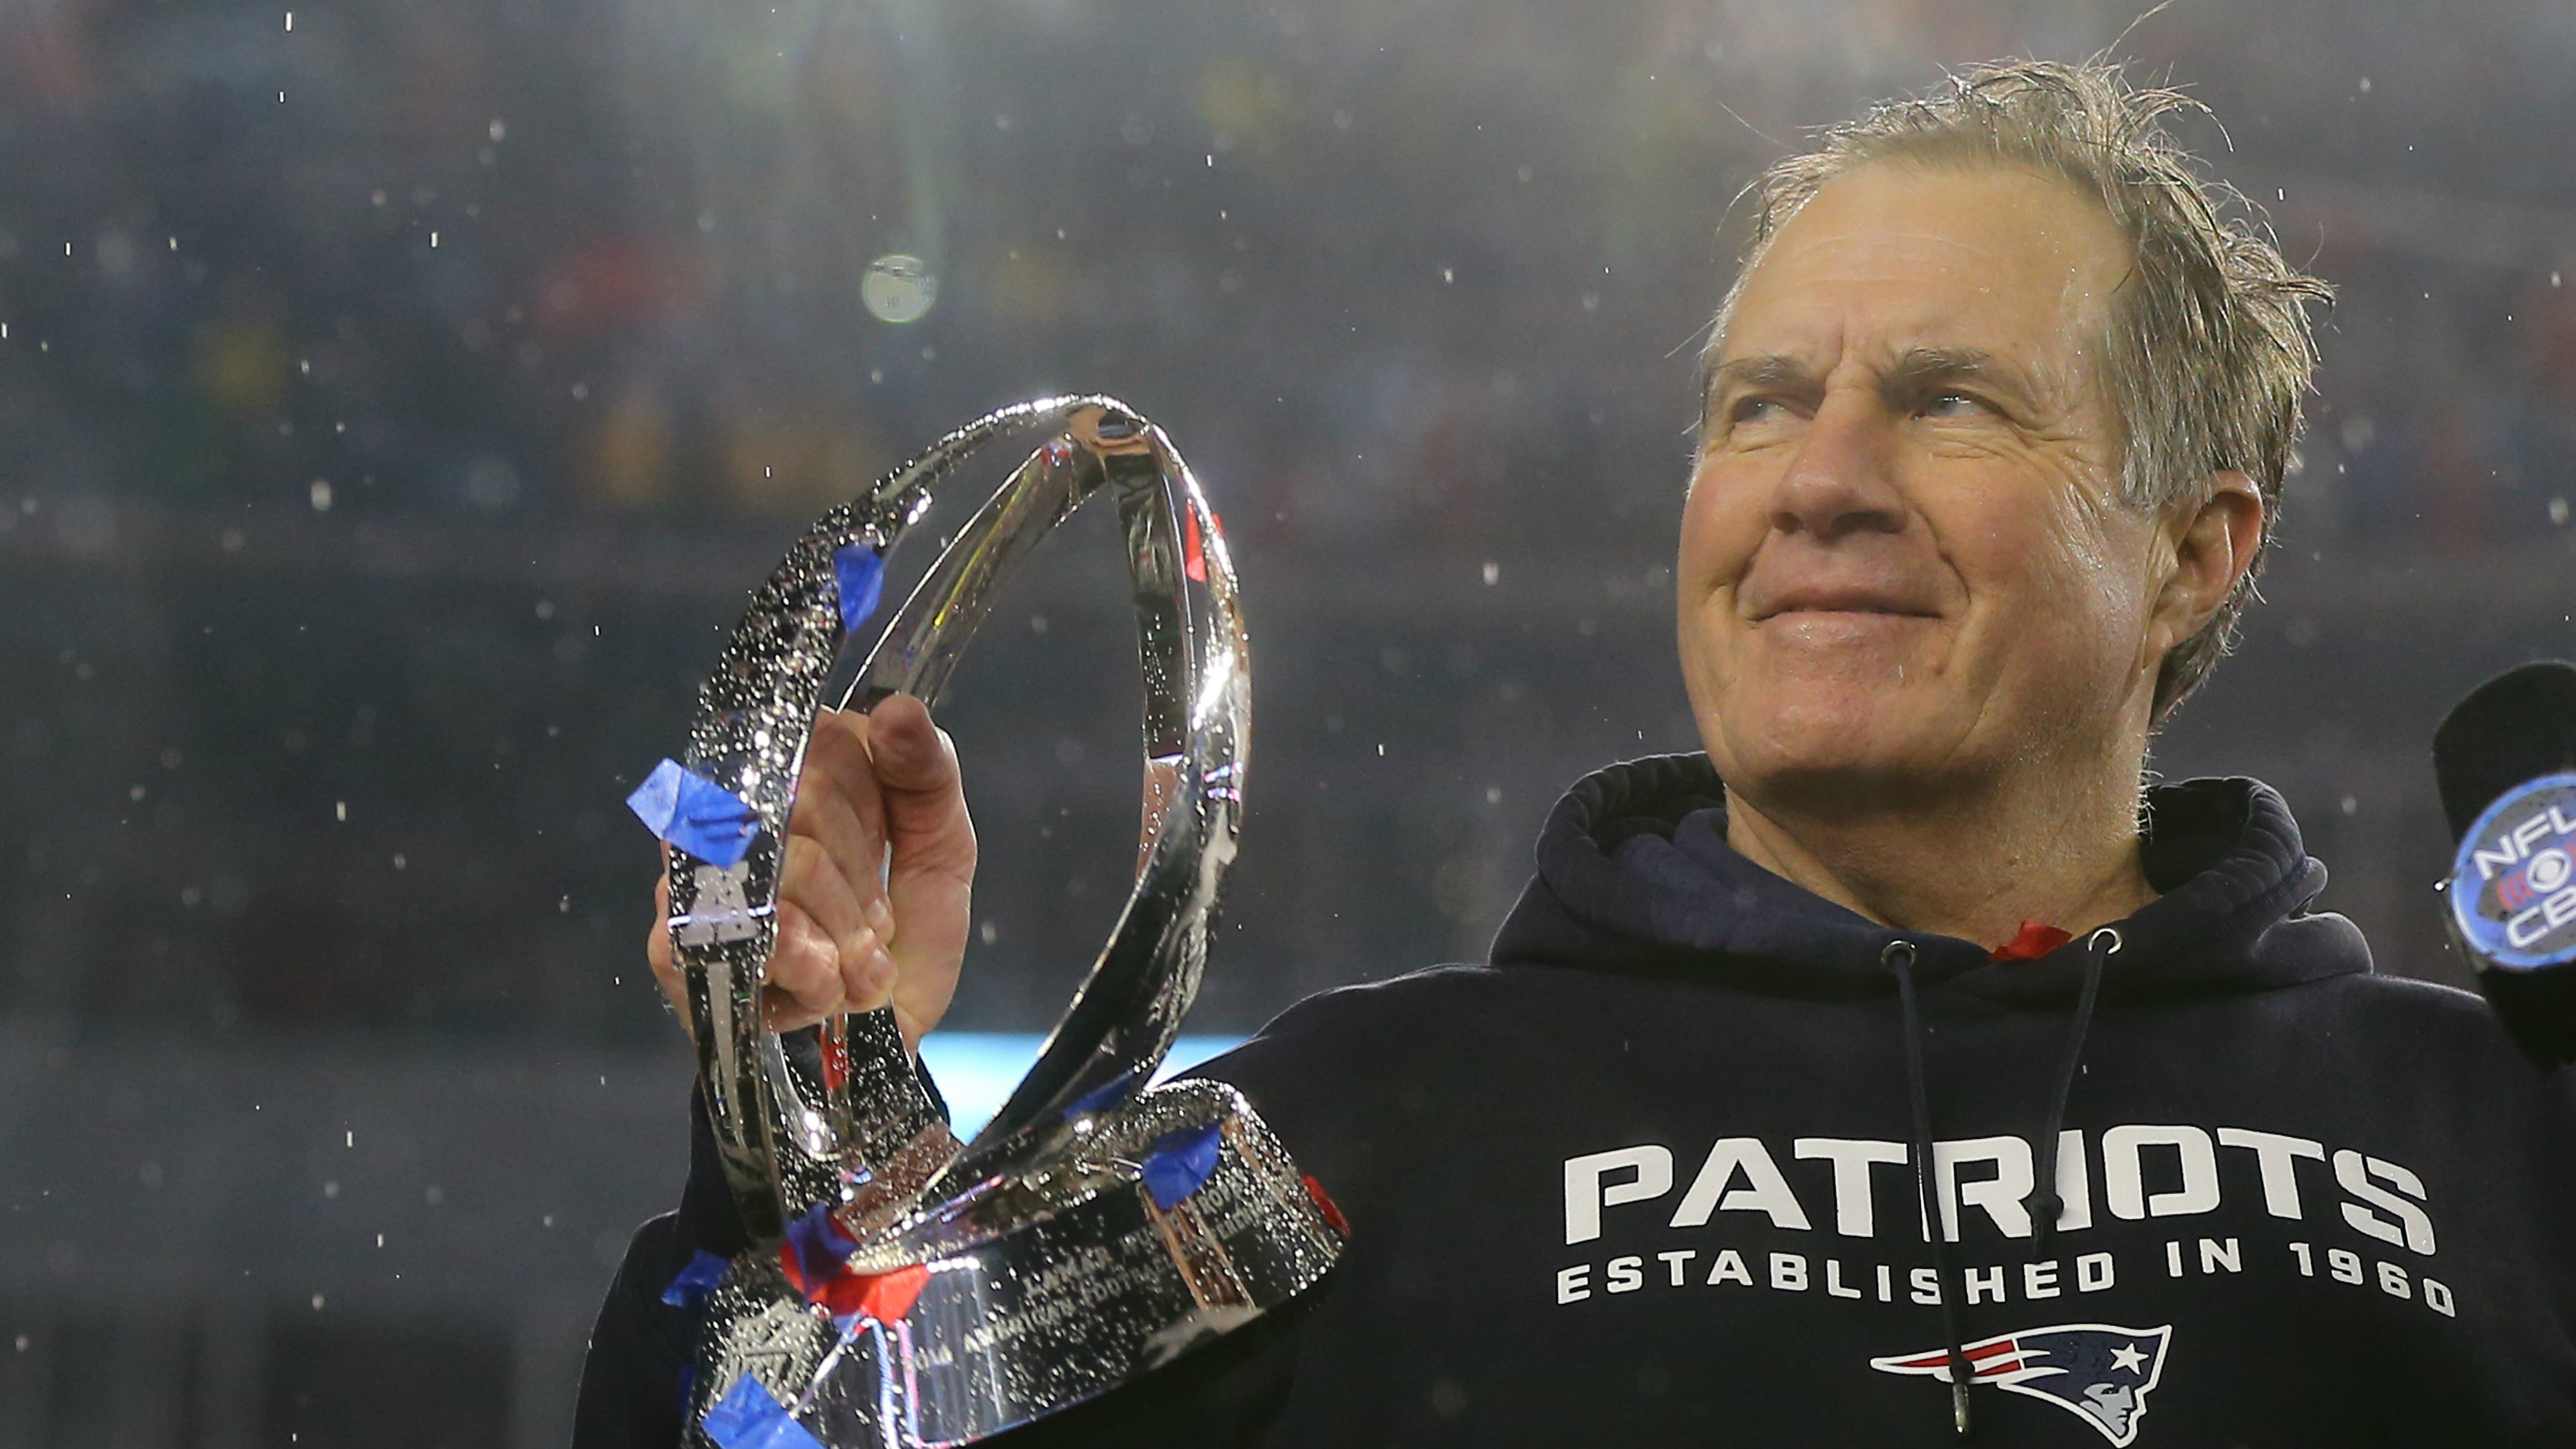 FOXBORO, MA - JANUARY 18: Head coach Bill Belichick of the New England Patriots holds up the Lamar Hunt Trophy after defeating the Indianapolis Colts in the 2015 AFC Championship Game at Gillette Stadium on January 18, 2015 in Foxboro, Massachusetts. The Patriots defeated the Colts 45-7. (Photo by Elsa/Getty Images)